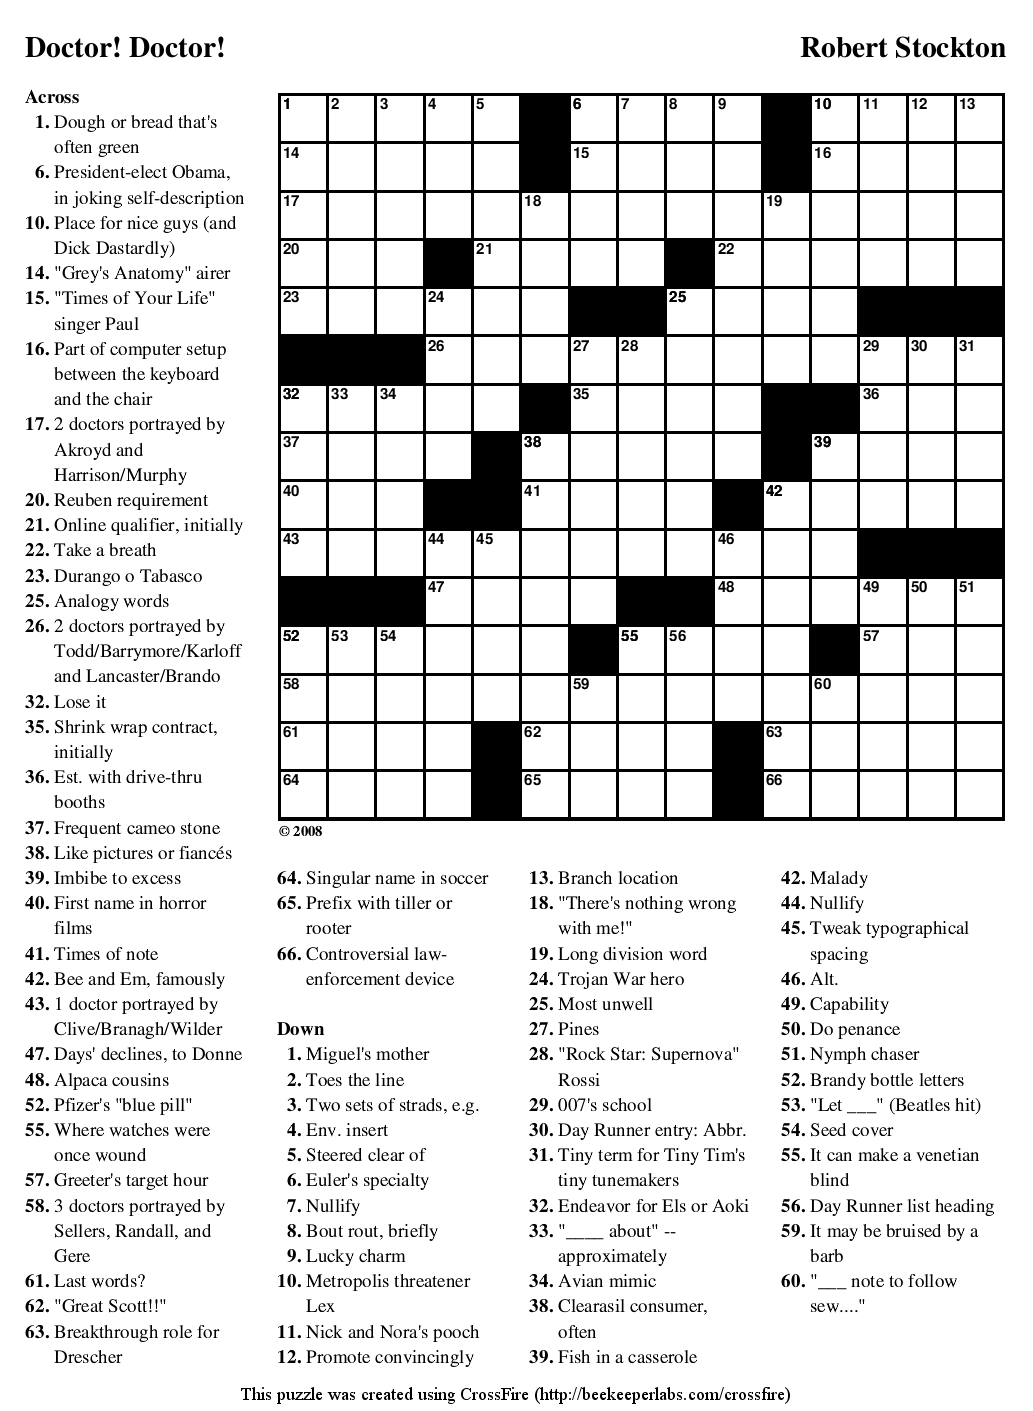 Crossword Puzzles Printable - Yahoo Image Search Results | Crossword - Printable Crossword Puzzles #1